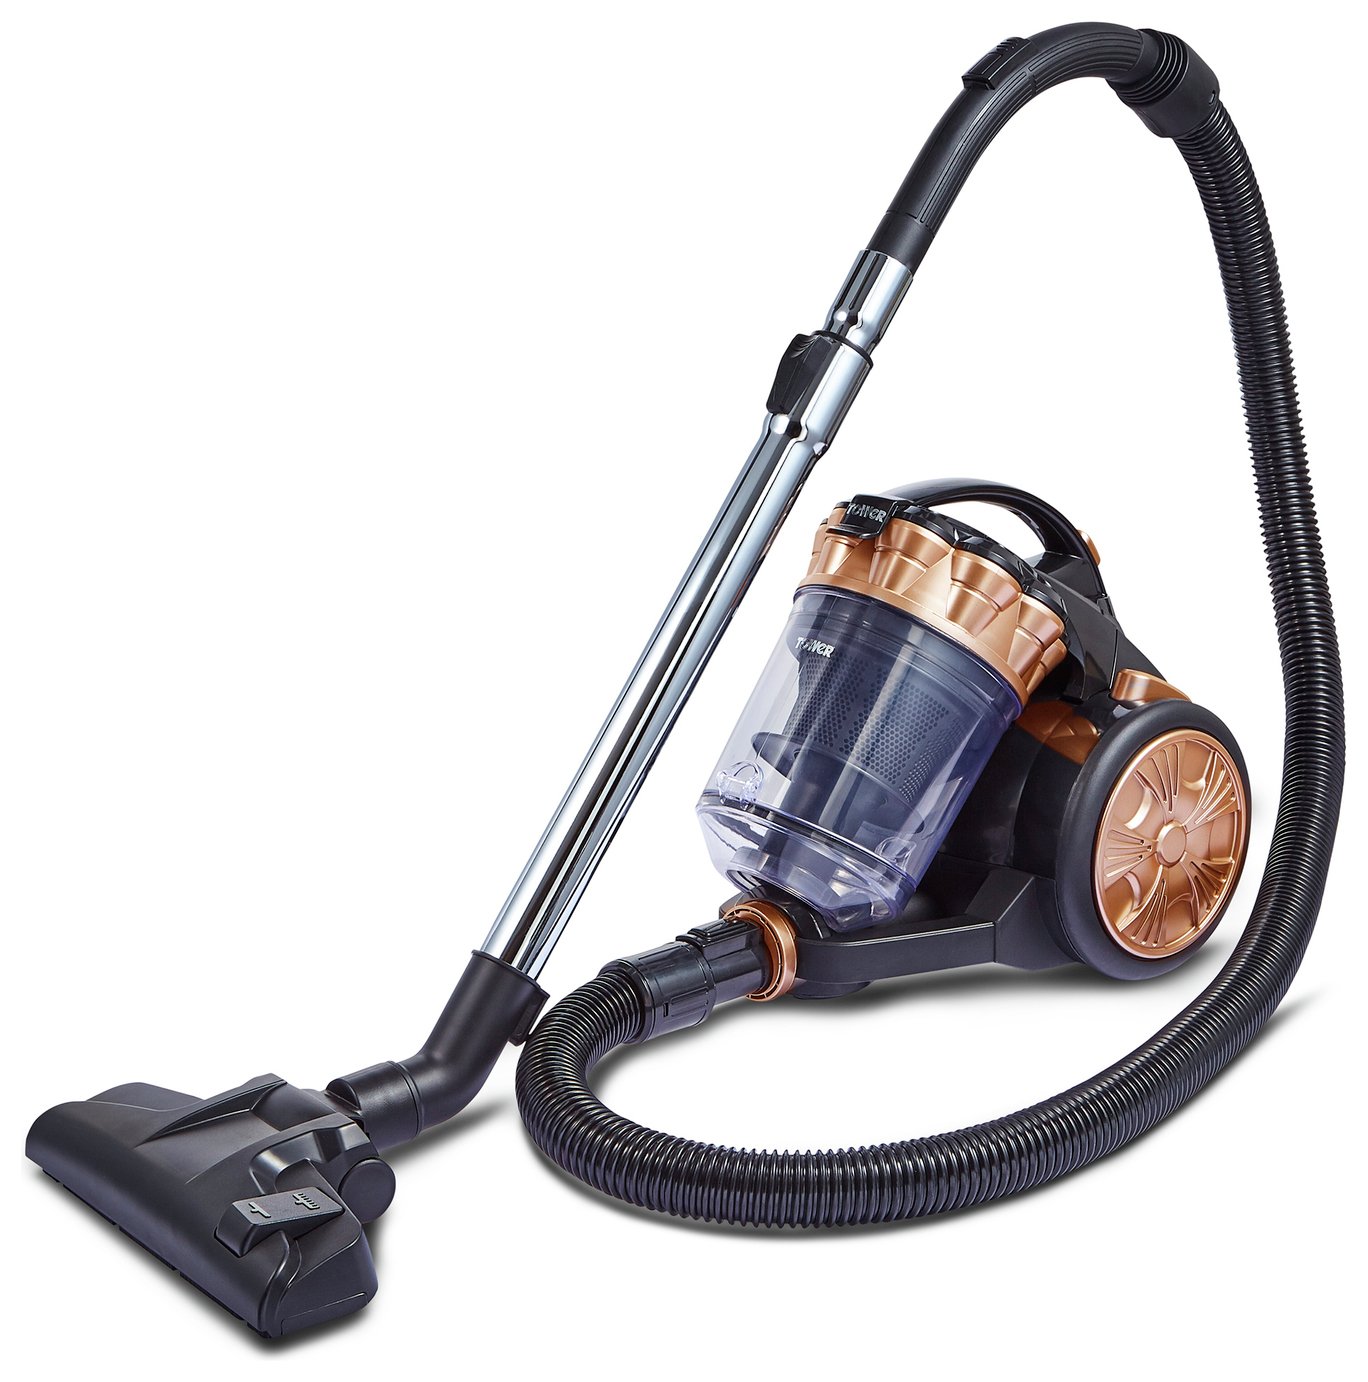 Tower RXP10 Multi Cyclonic Pet Corded Vacuum Cleaner